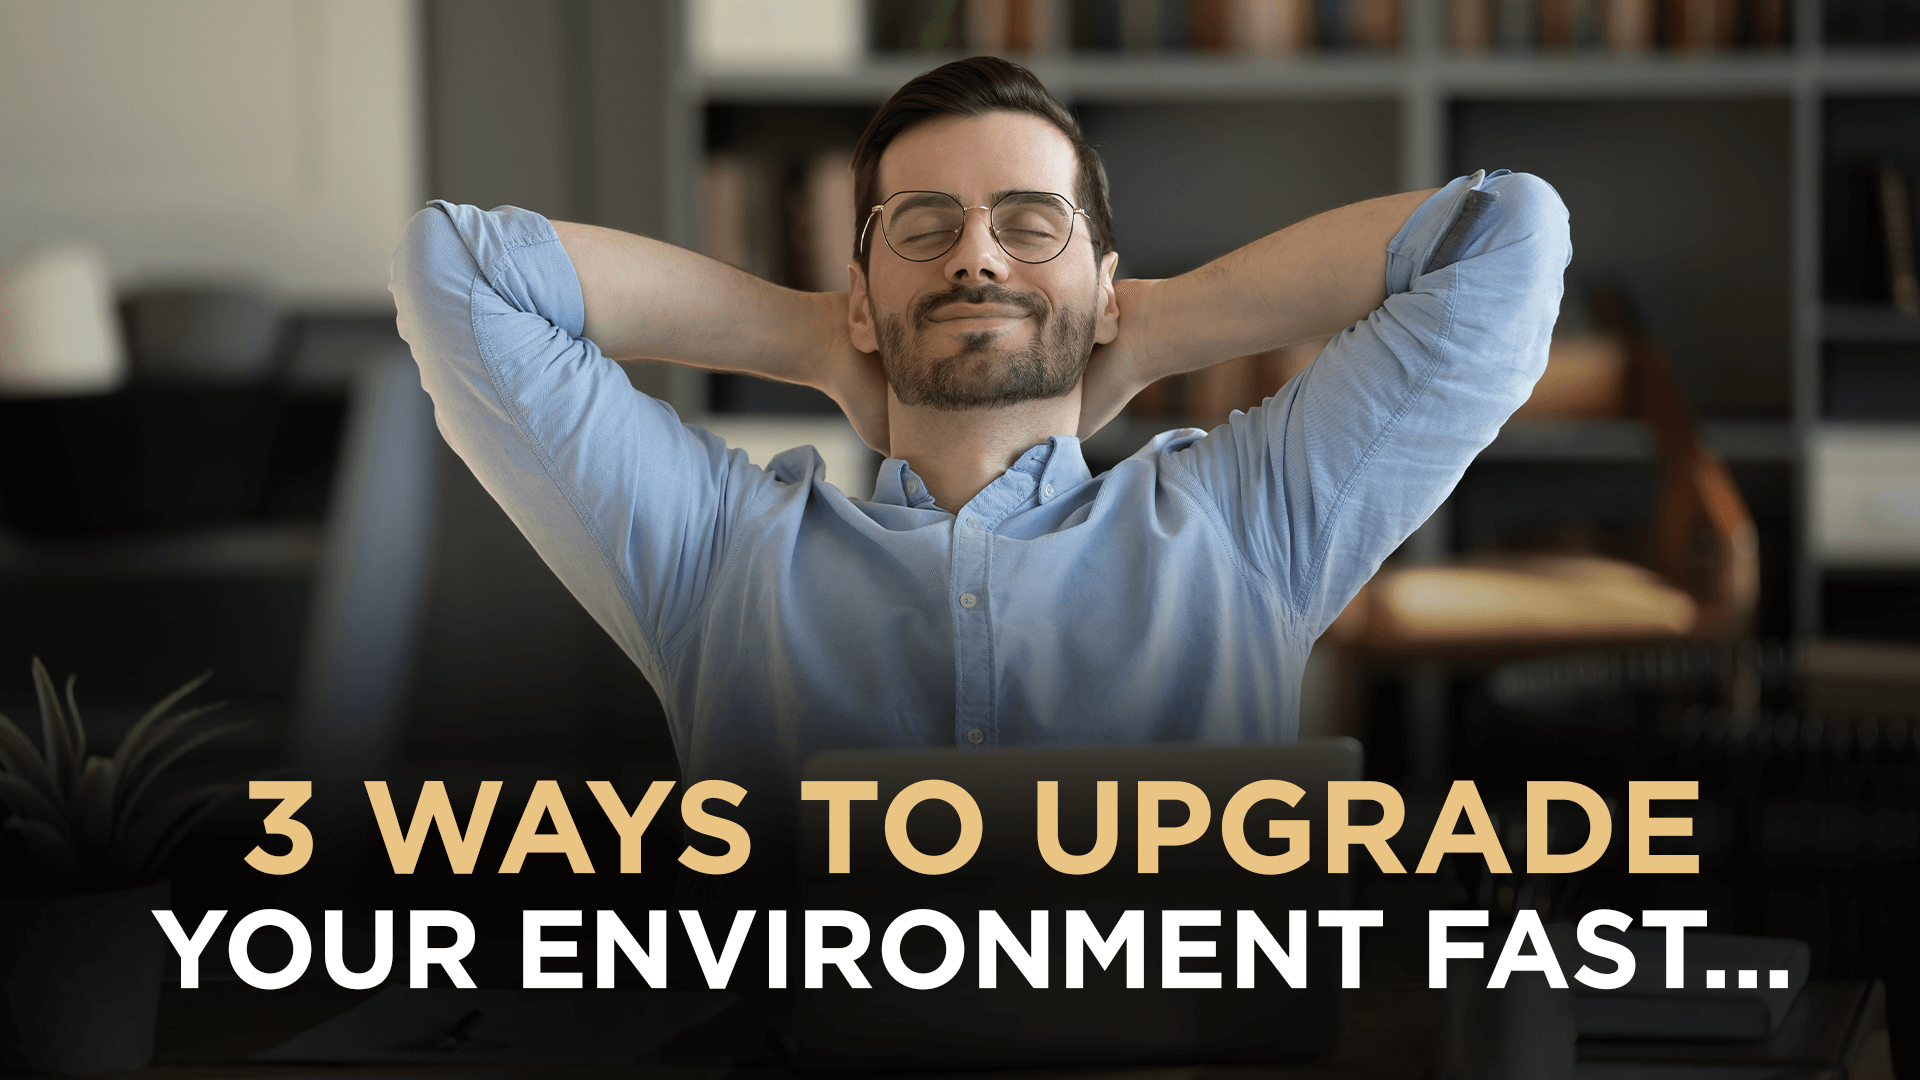 3 Ways to Upgrade Your Environment